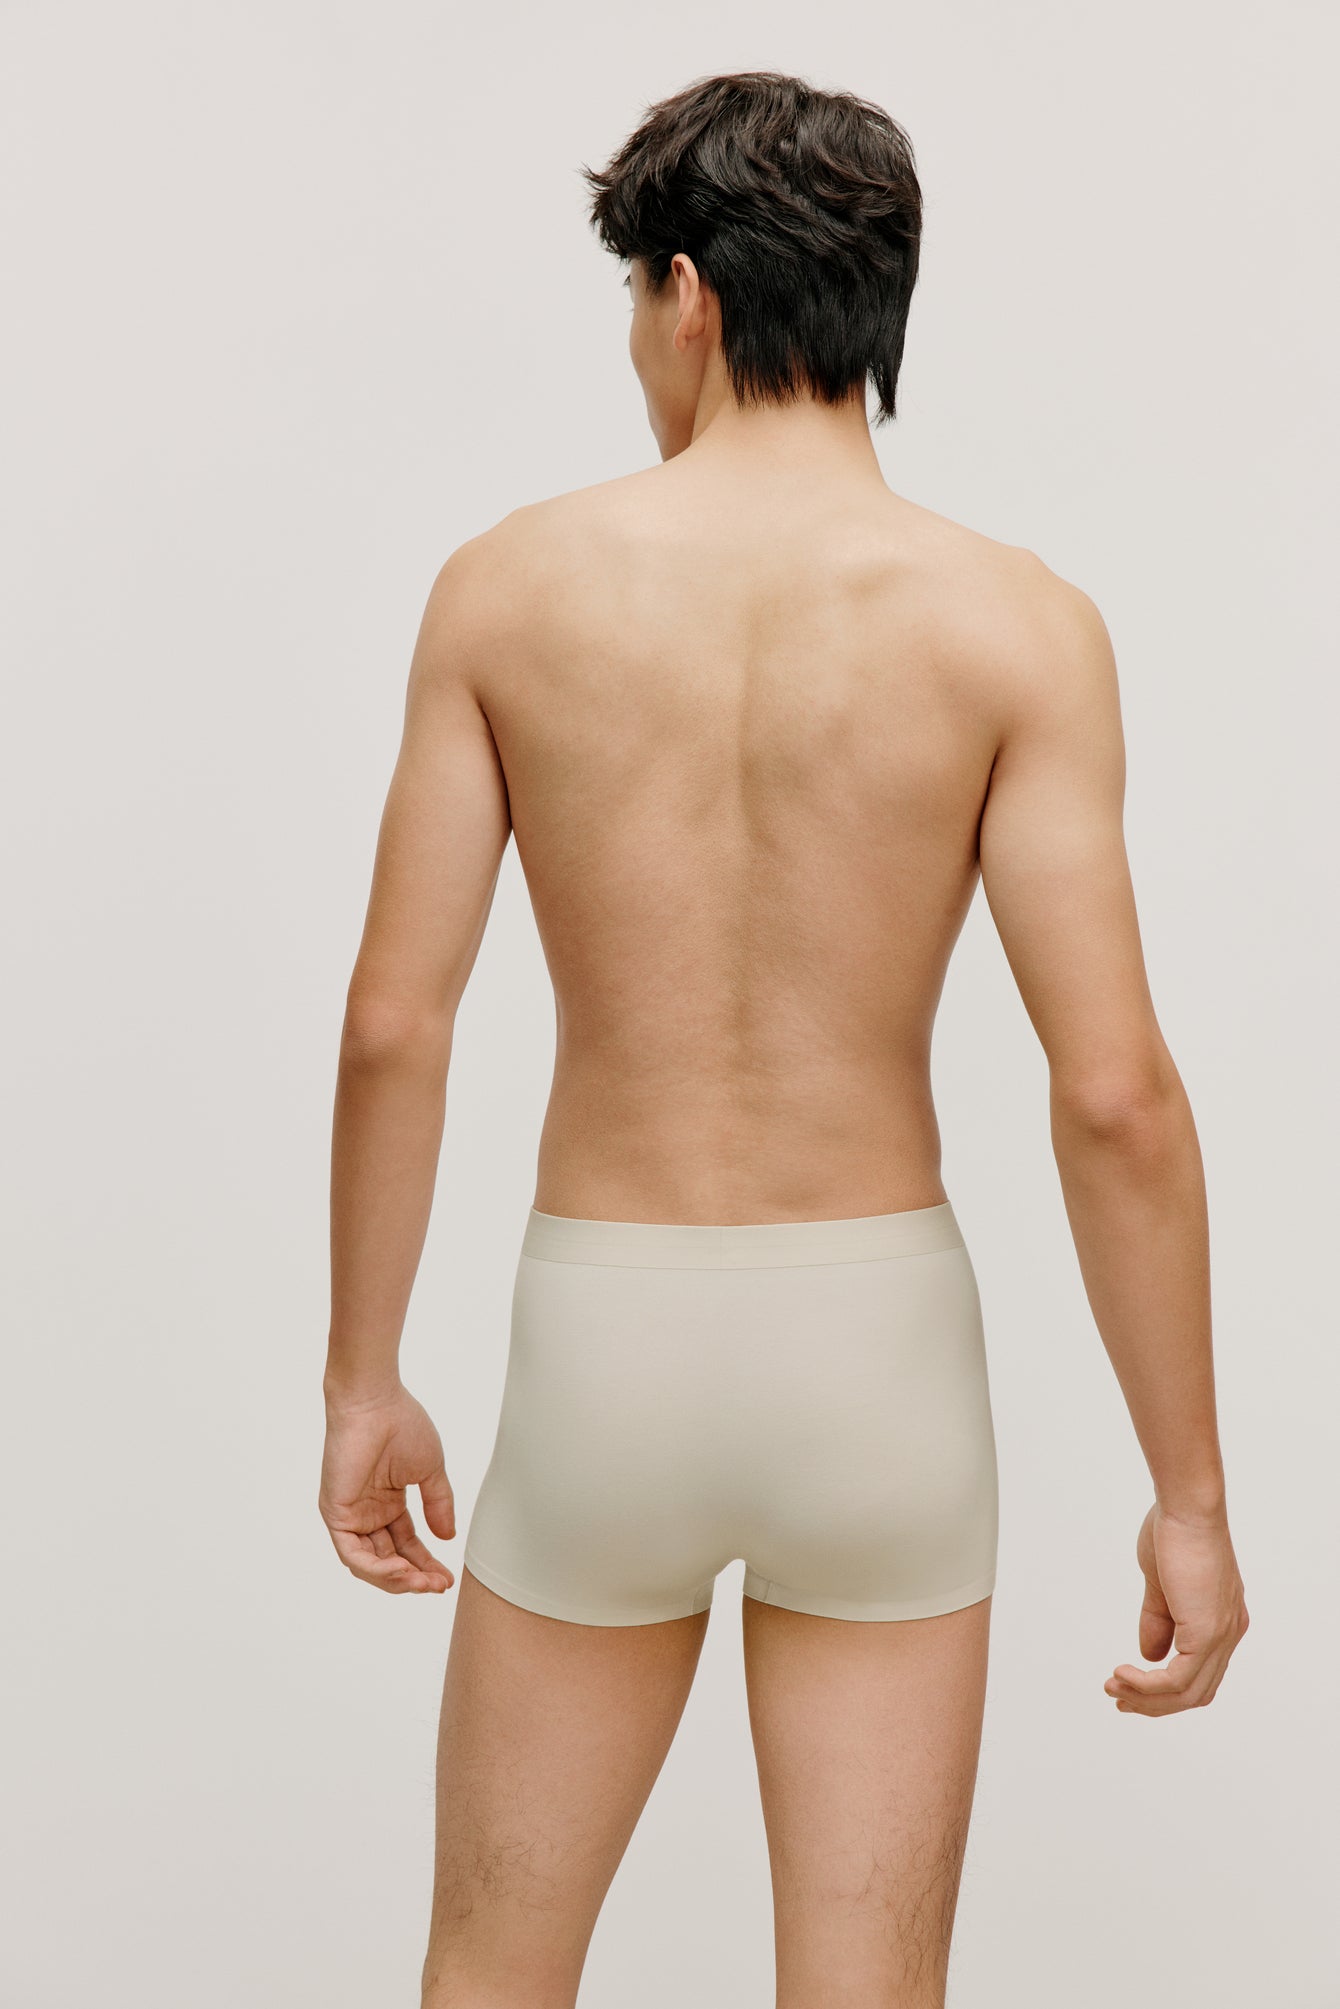 back of a man wearing a cream brief